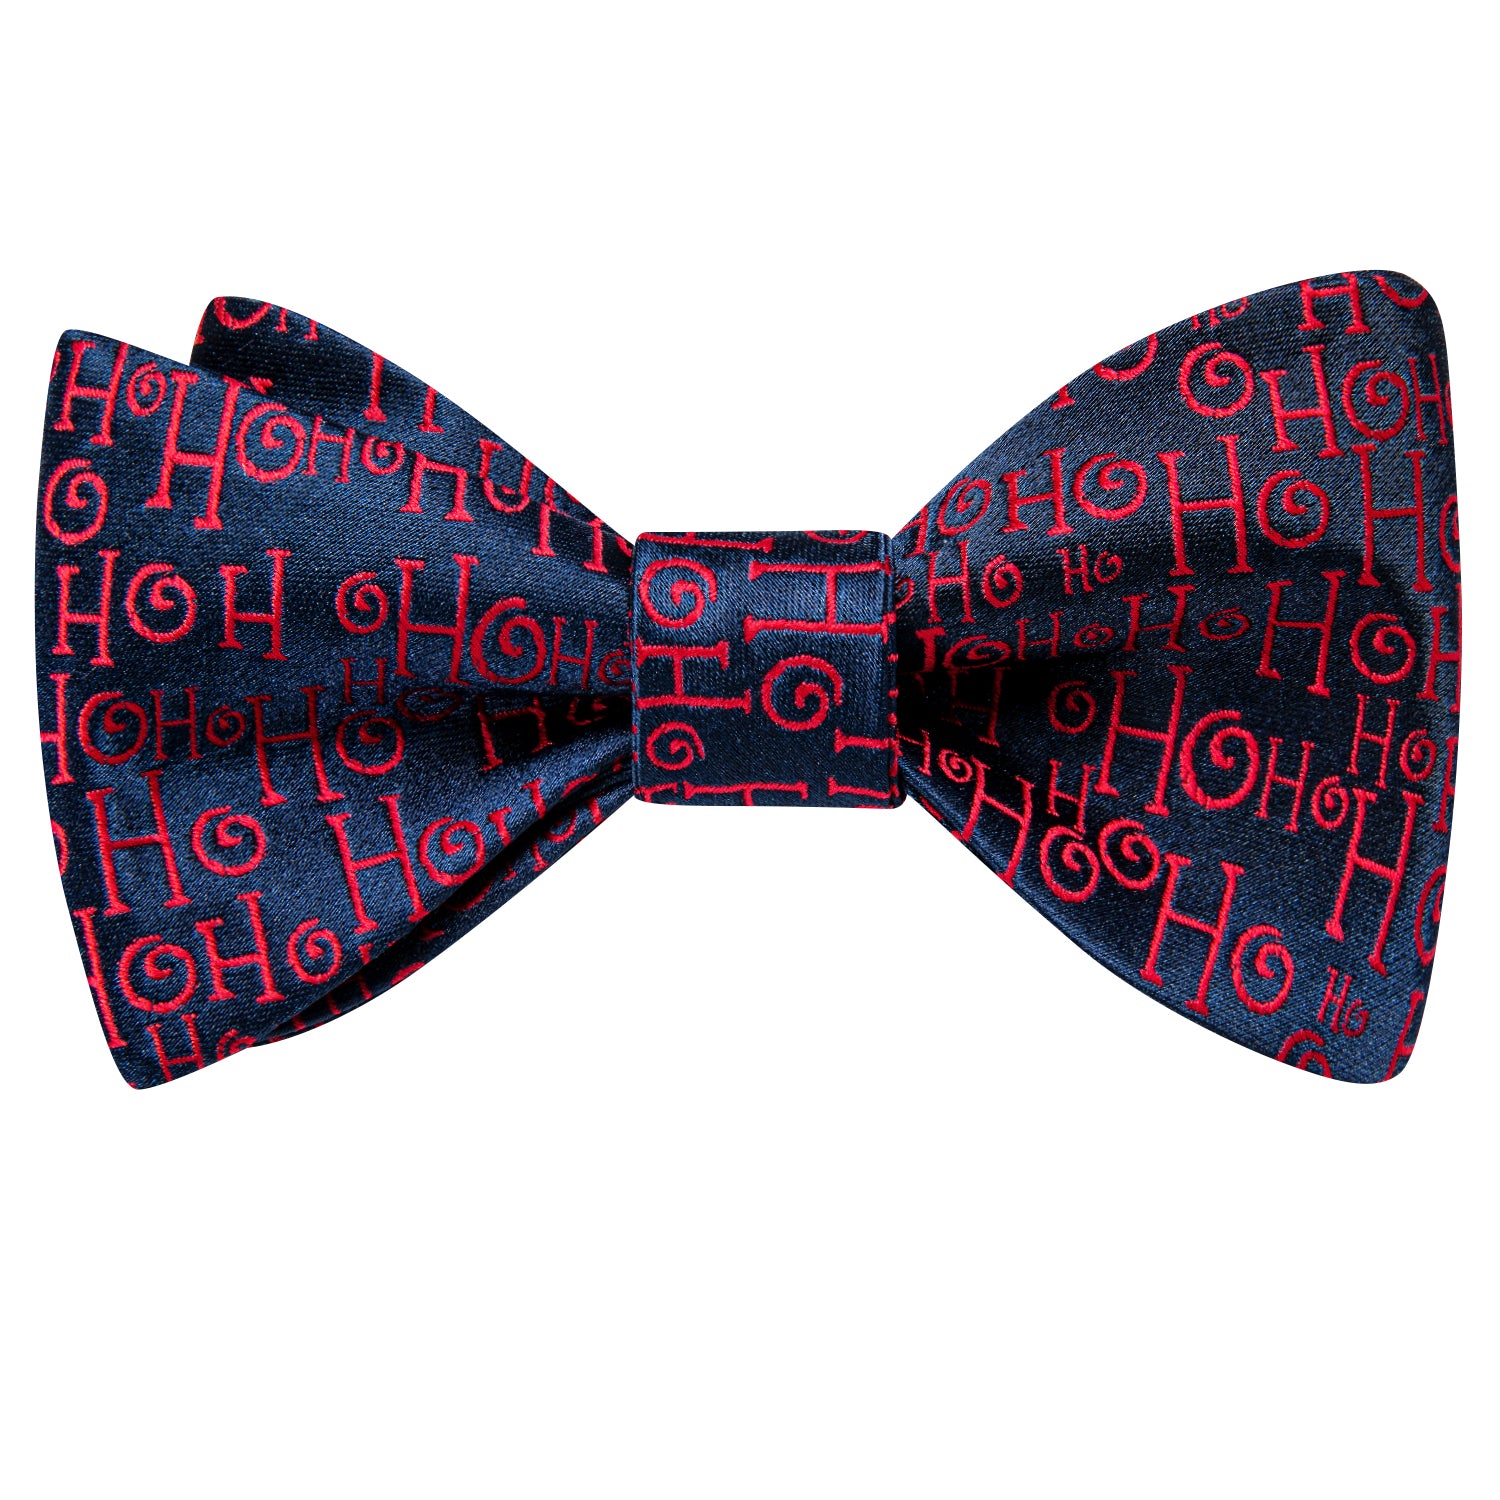 Christmas Blue Red Letter Novelty Self-tied Bow Tie Hanky Cufflinks Set